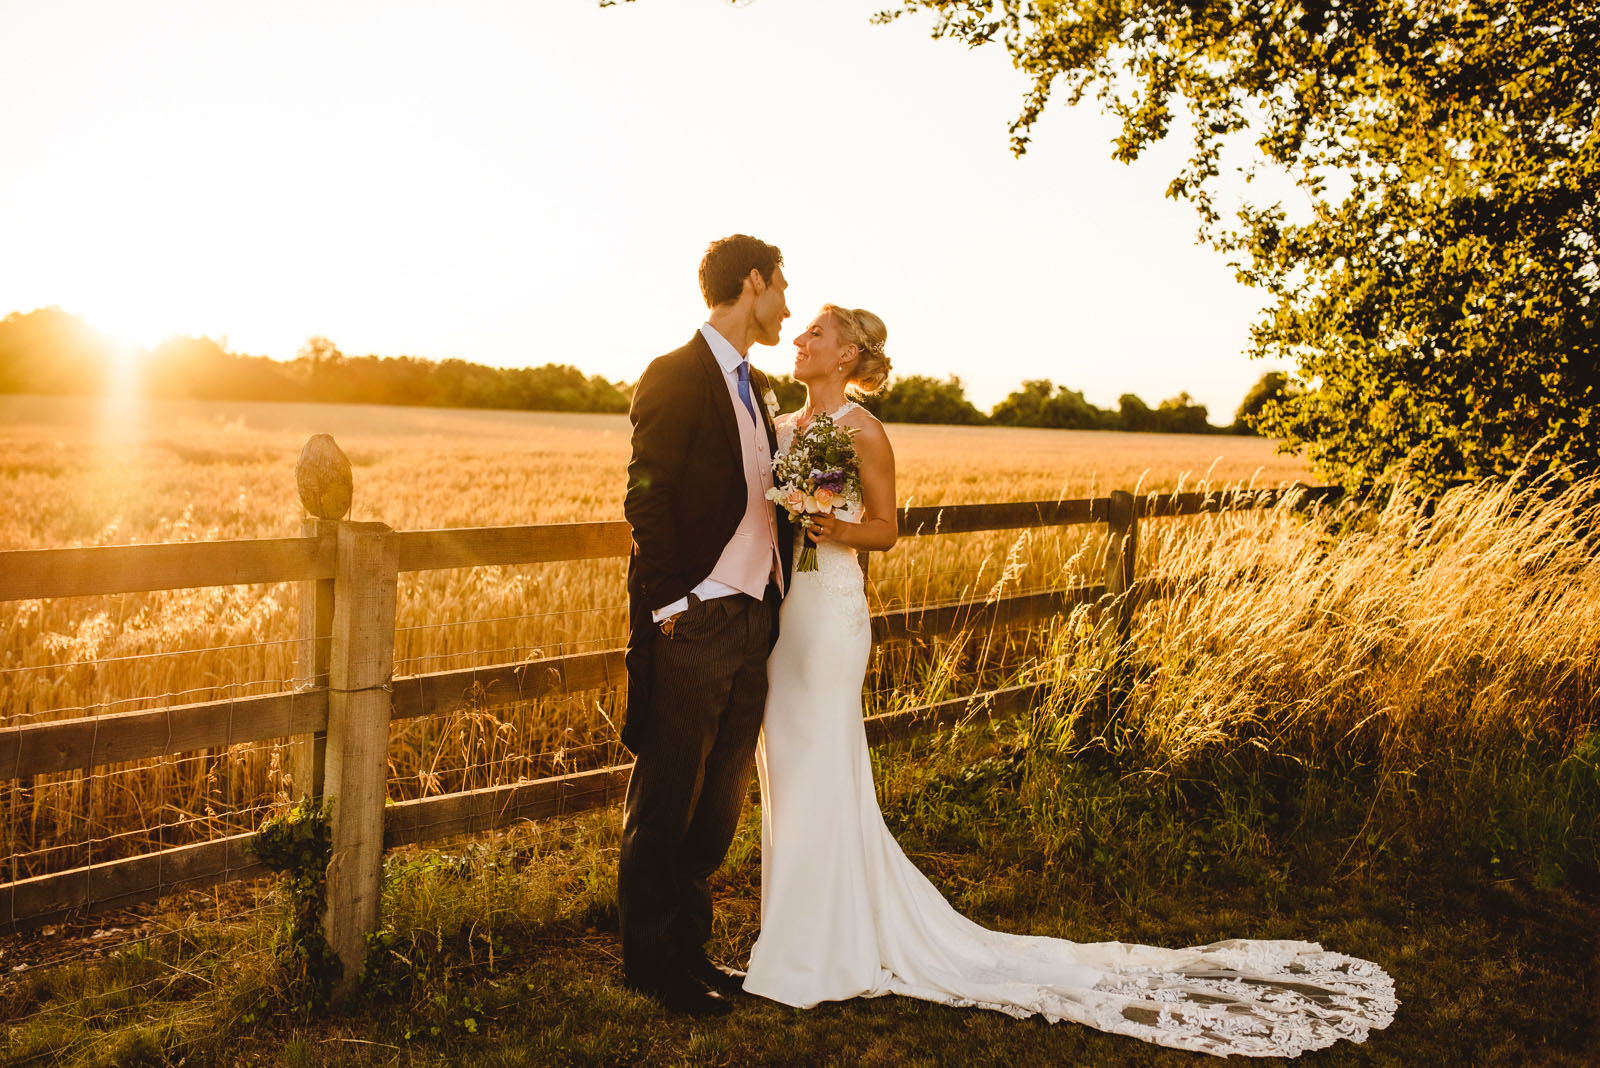 Beautiful golden hour wedding day bride and groom portraits Hampshire.